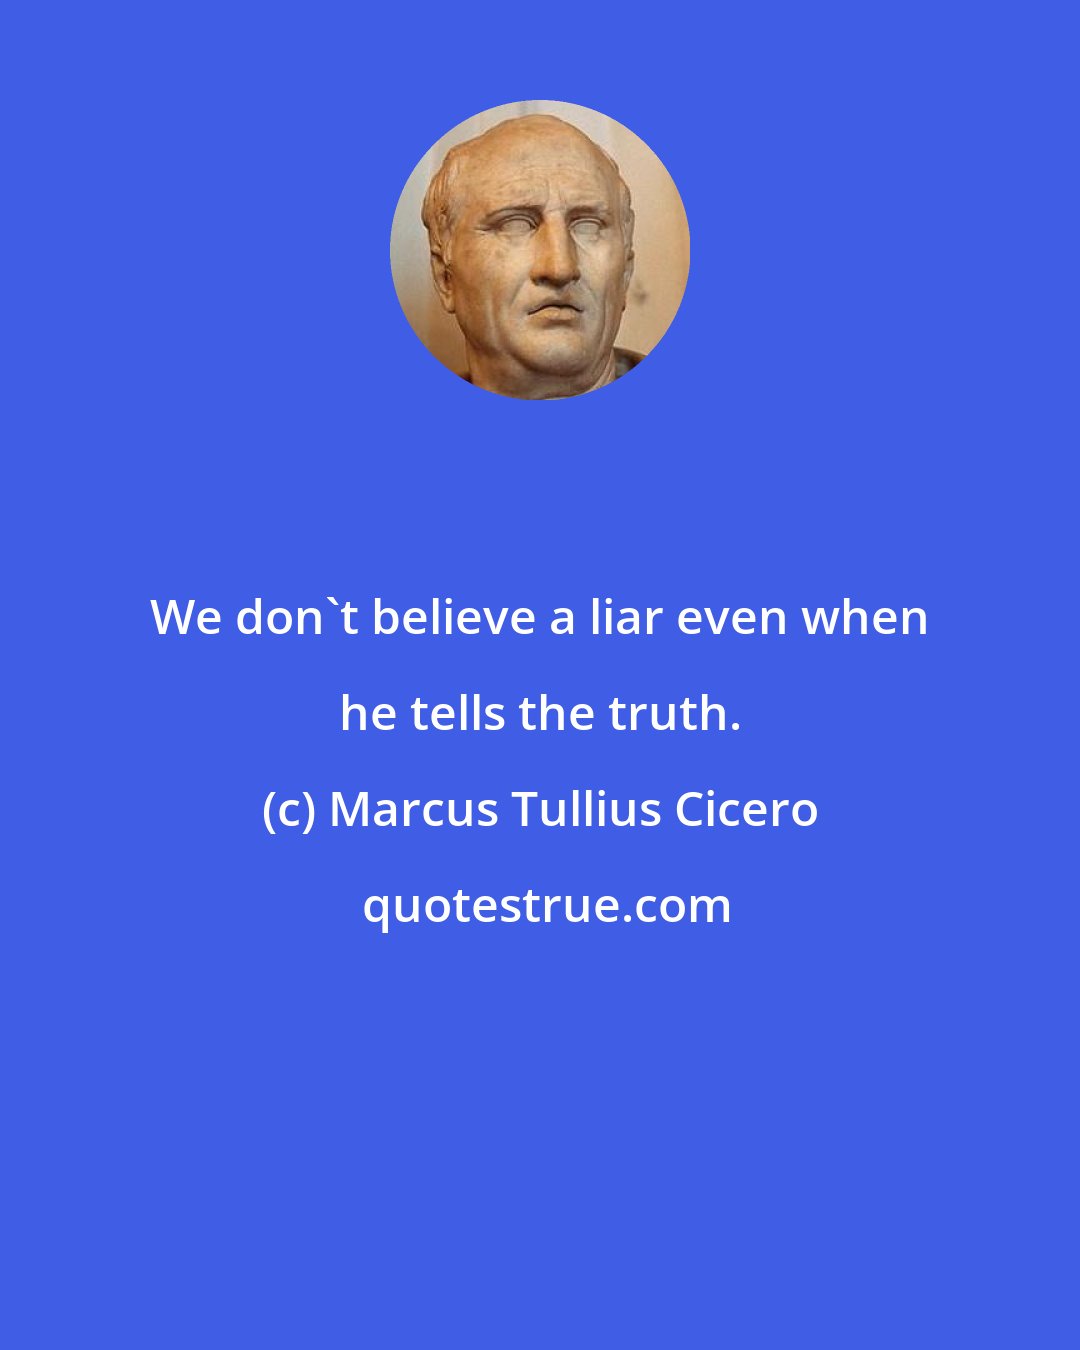 Marcus Tullius Cicero: We don't believe a liar even when he tells the truth.